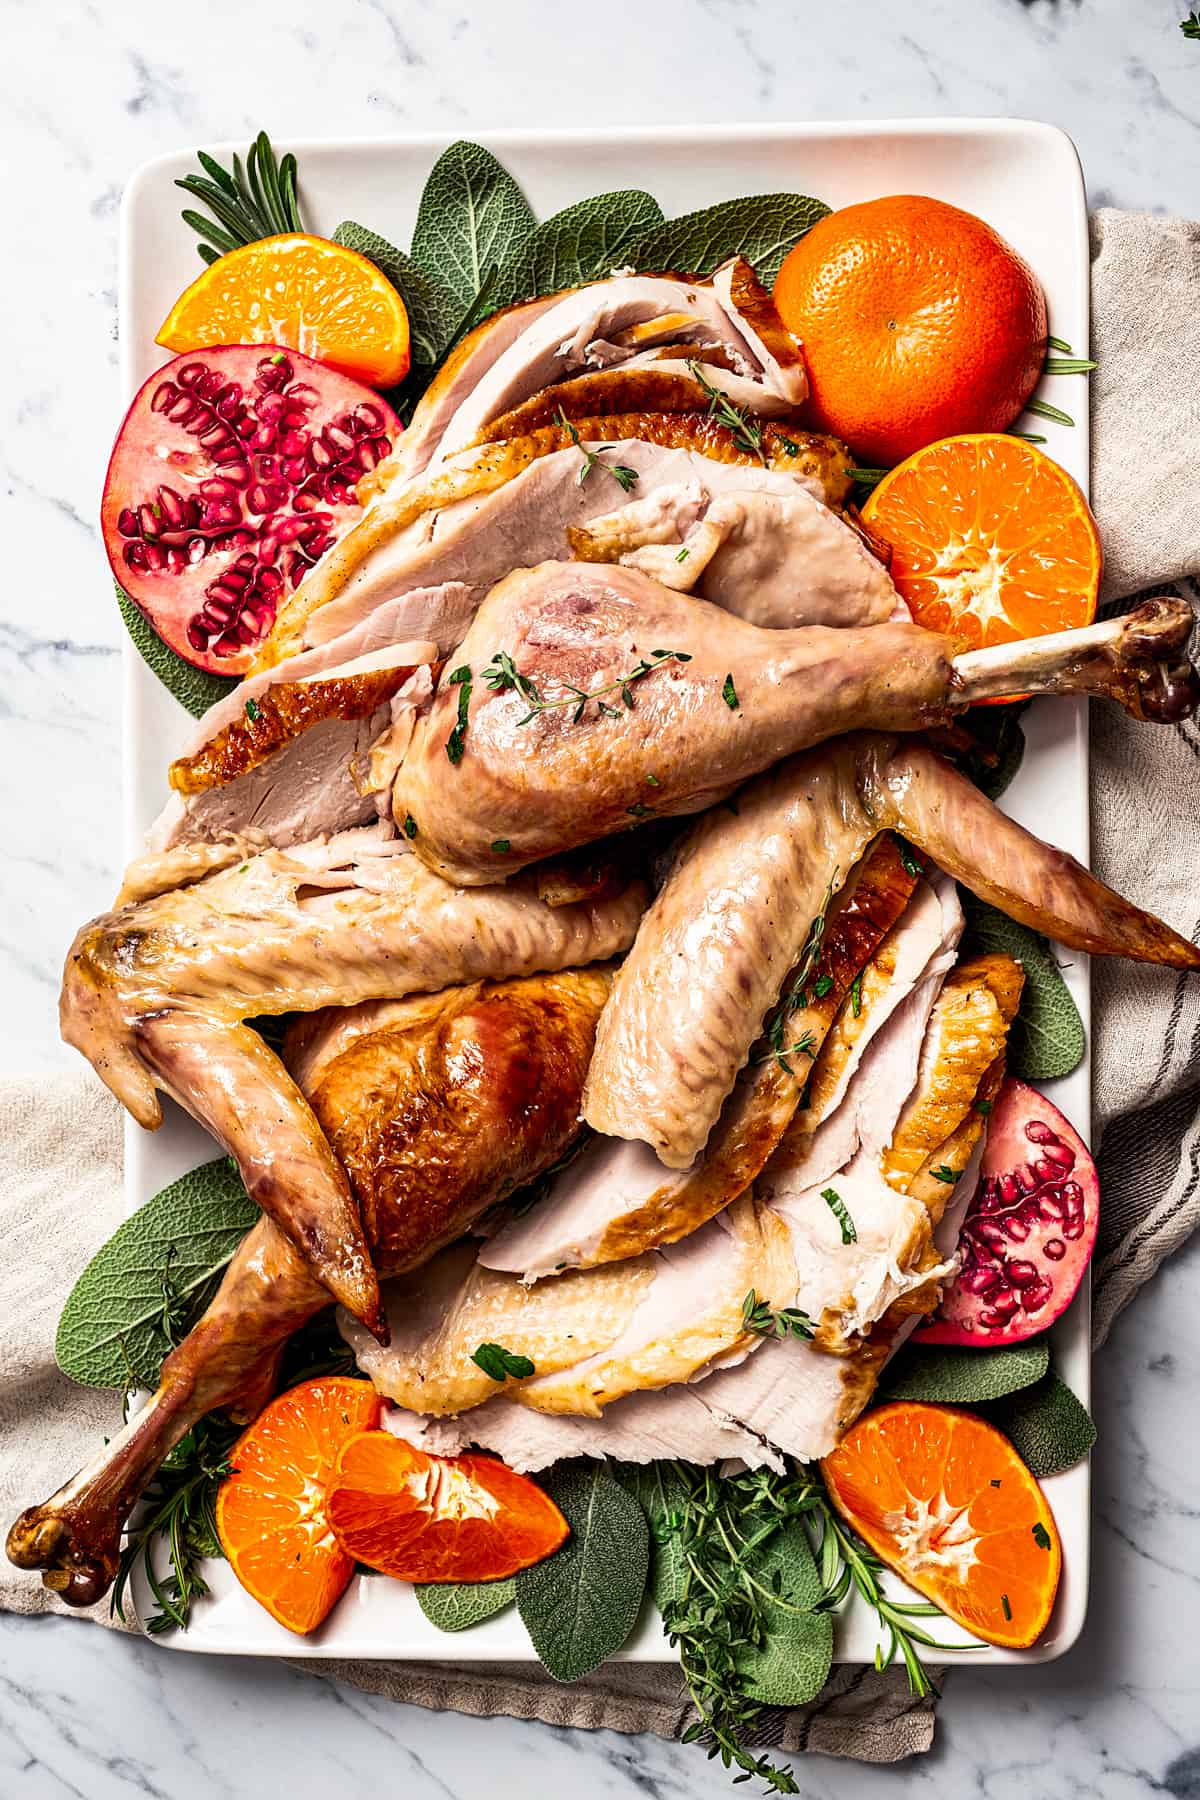 A serving platter of turkey drumsticks, wings, and breast meat, garnished with pomegranate and orange sections and fresh herbs.